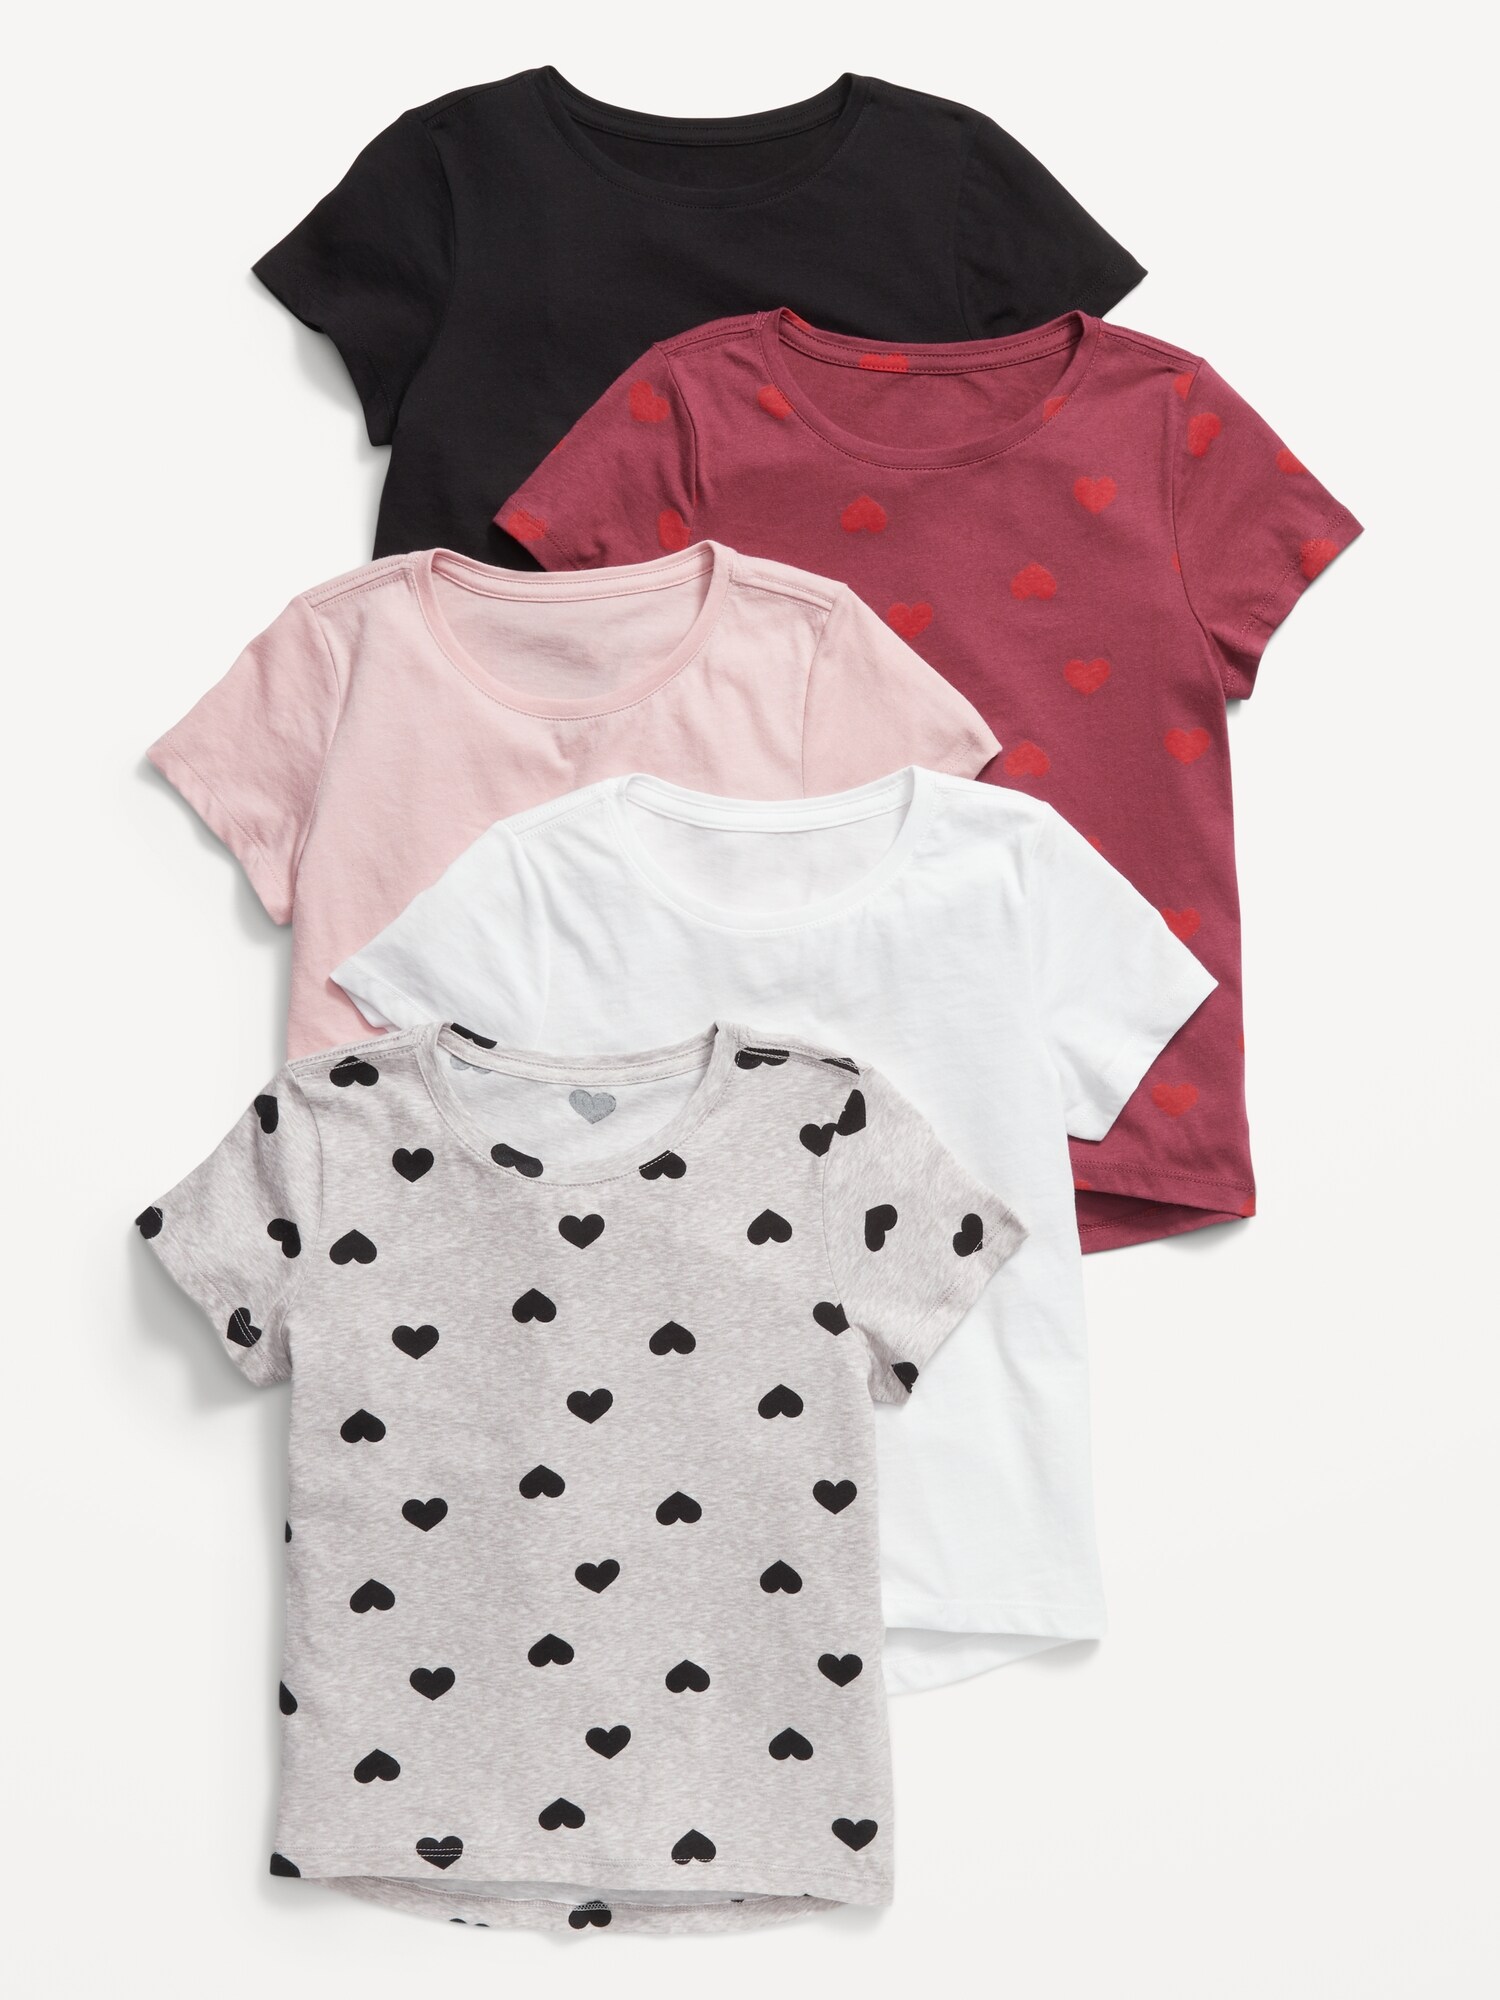 Old Navy Softest Short-Sleeve T-Shirt Variety 5-Pack for Girls red. 1